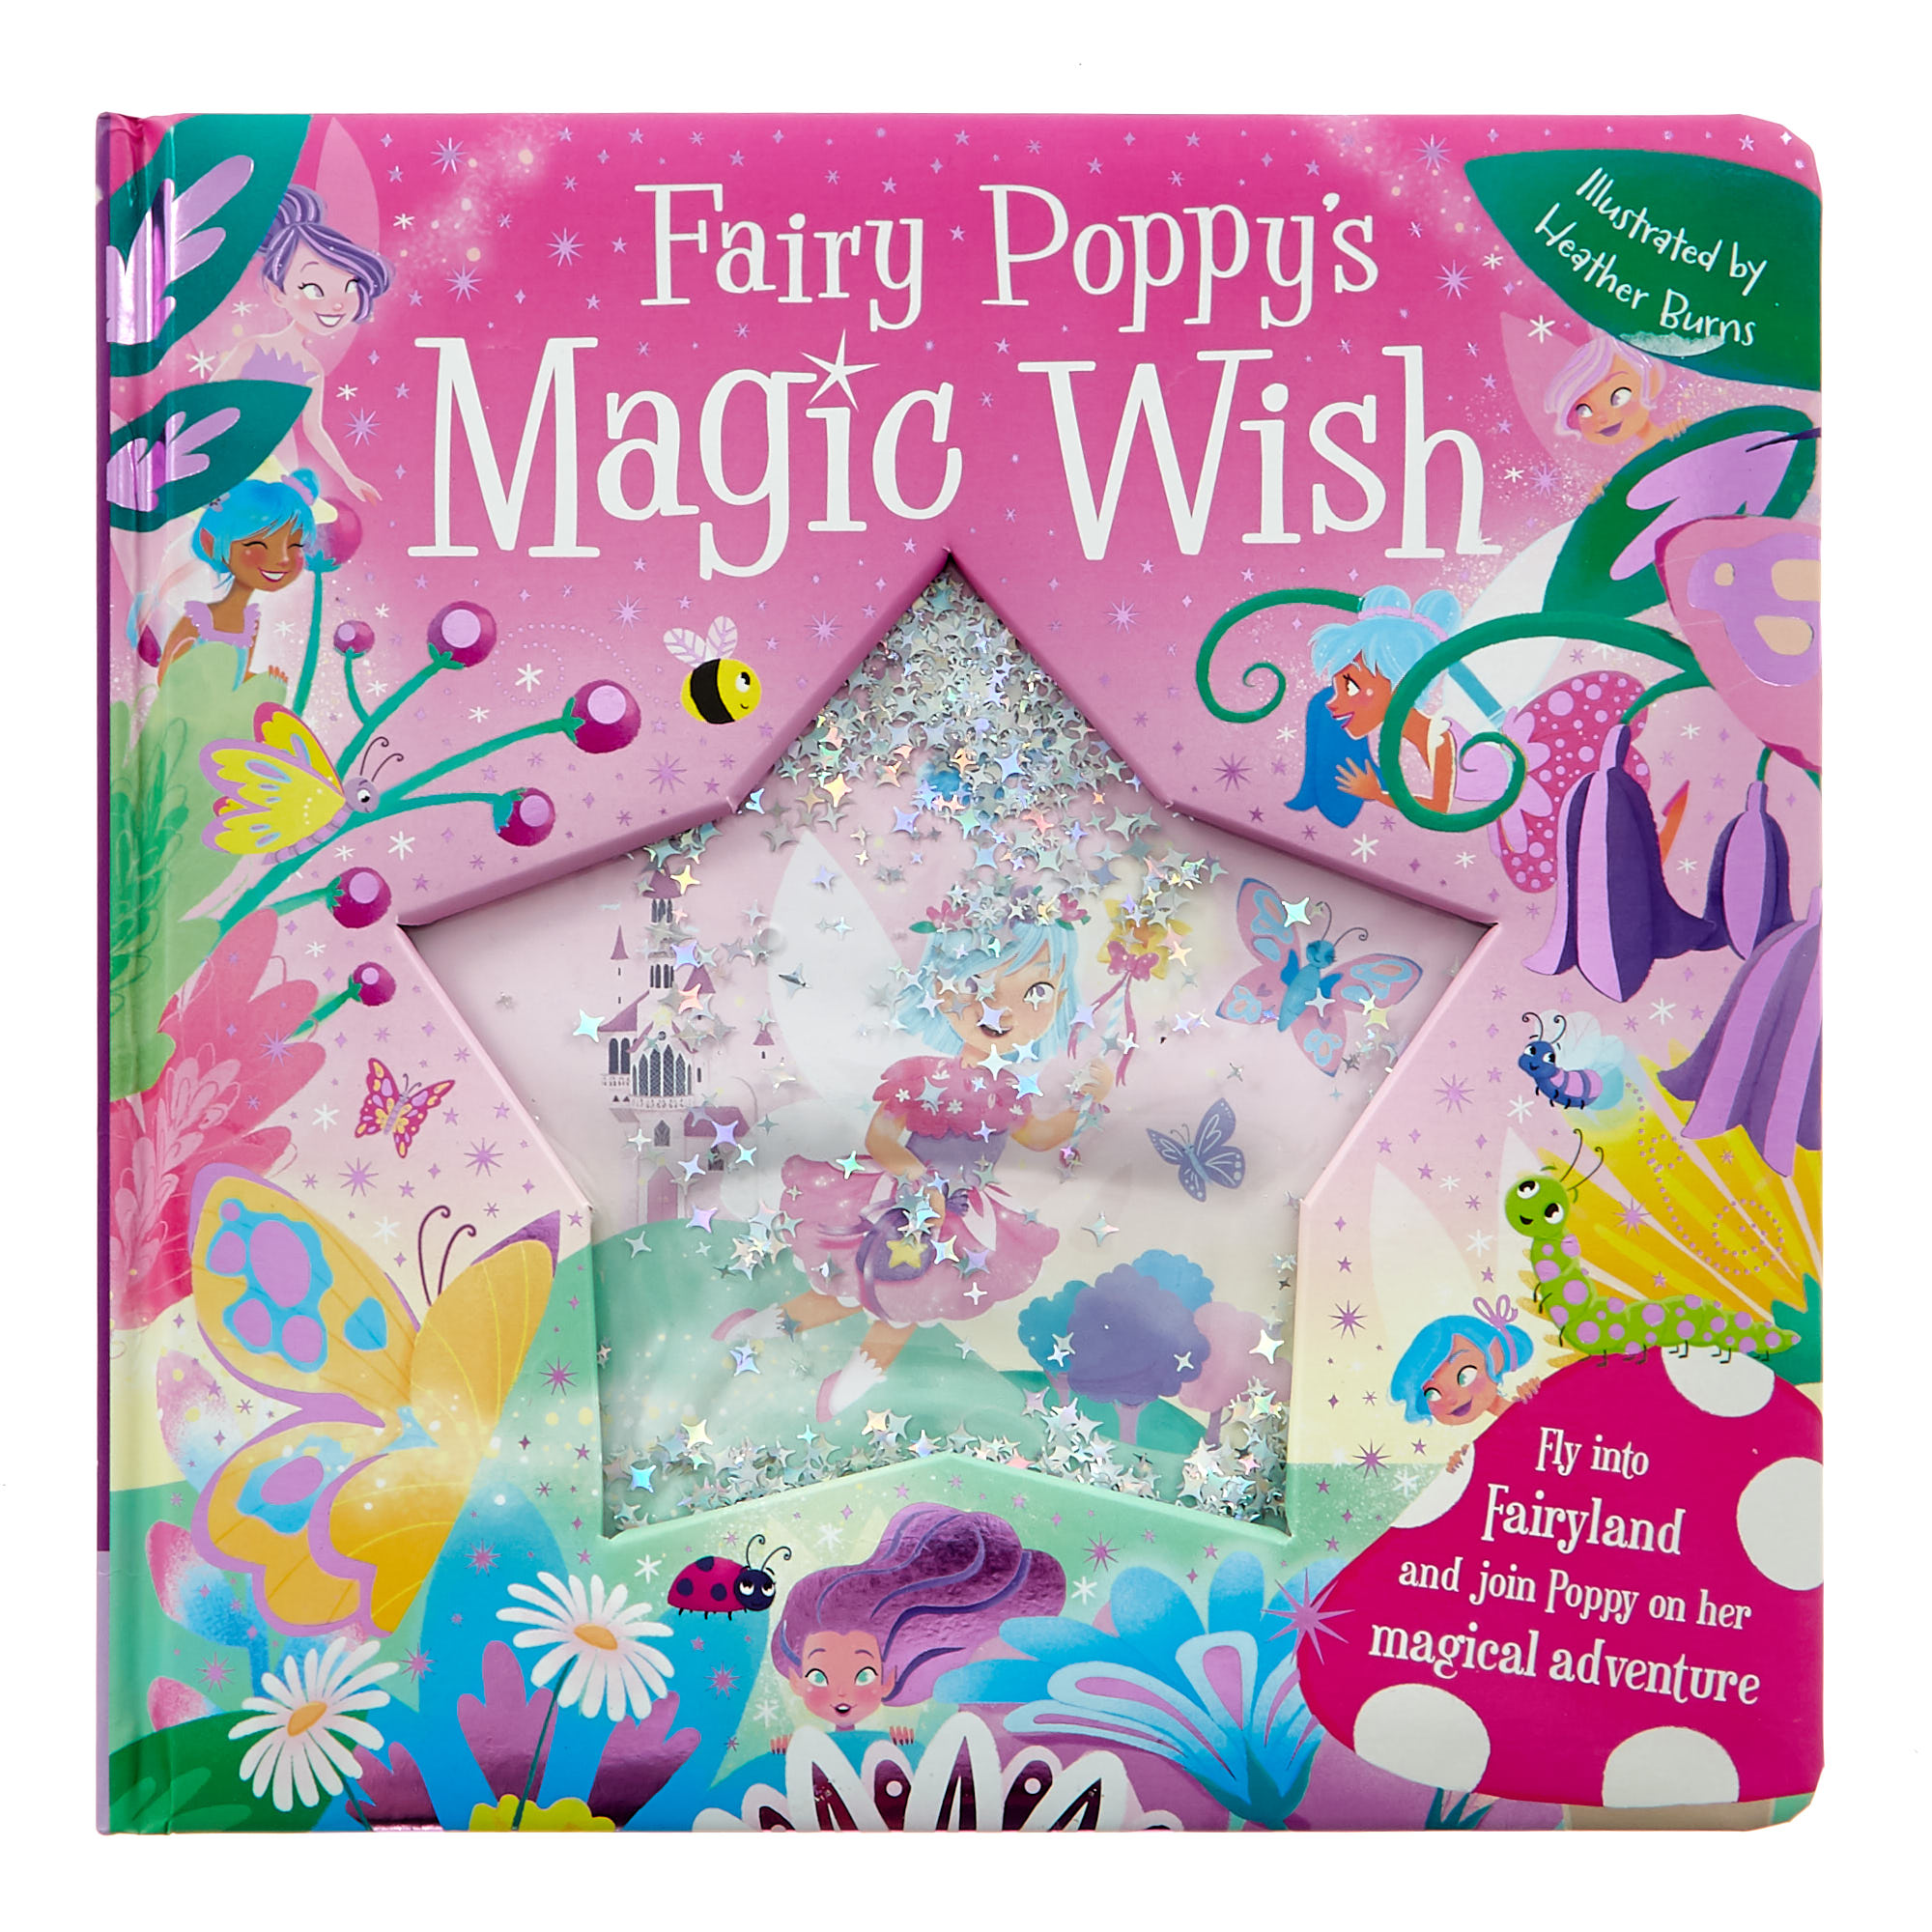 Buy Fairy Poppy's Magic Wish Story Book for GBP 2.99 | Card Factory UK